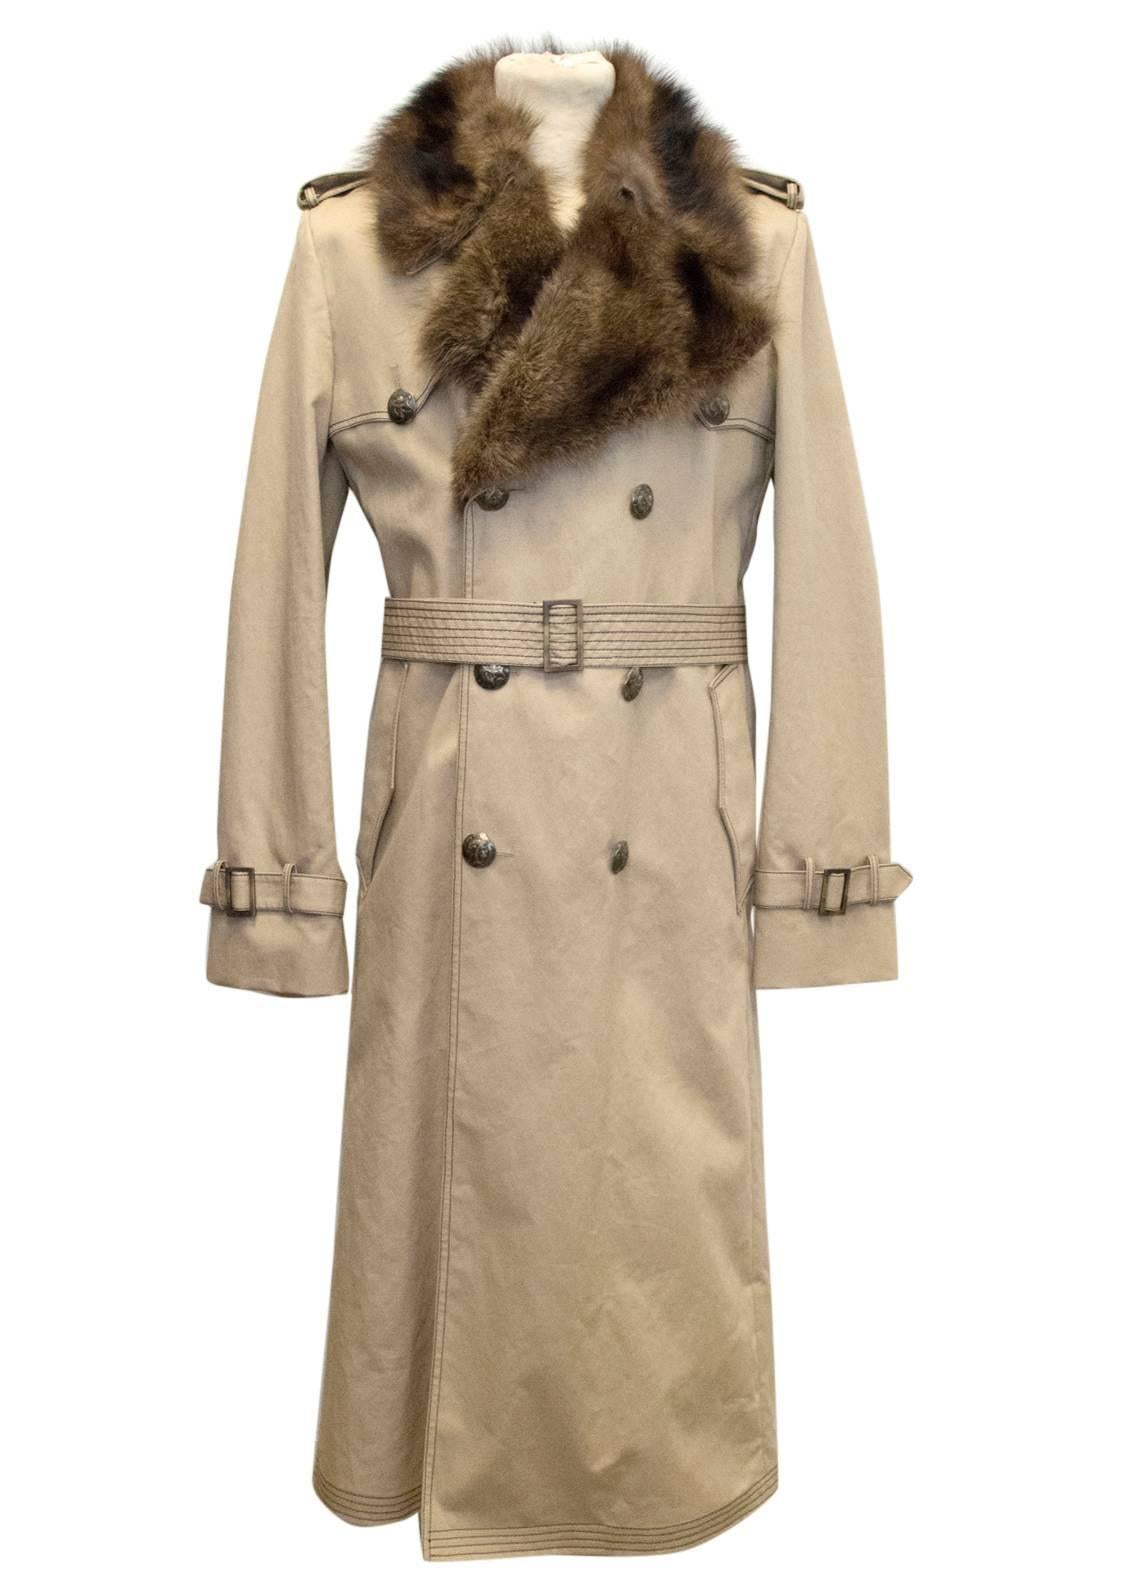 Fendi men's beige trench coat with black stitching and detachable brown wolf fur collar. Features large antique style brass buttons with Roman soldier / Fendi logo motif. Coat is heavy weight and semi lined with an additional sheared beaver fur,